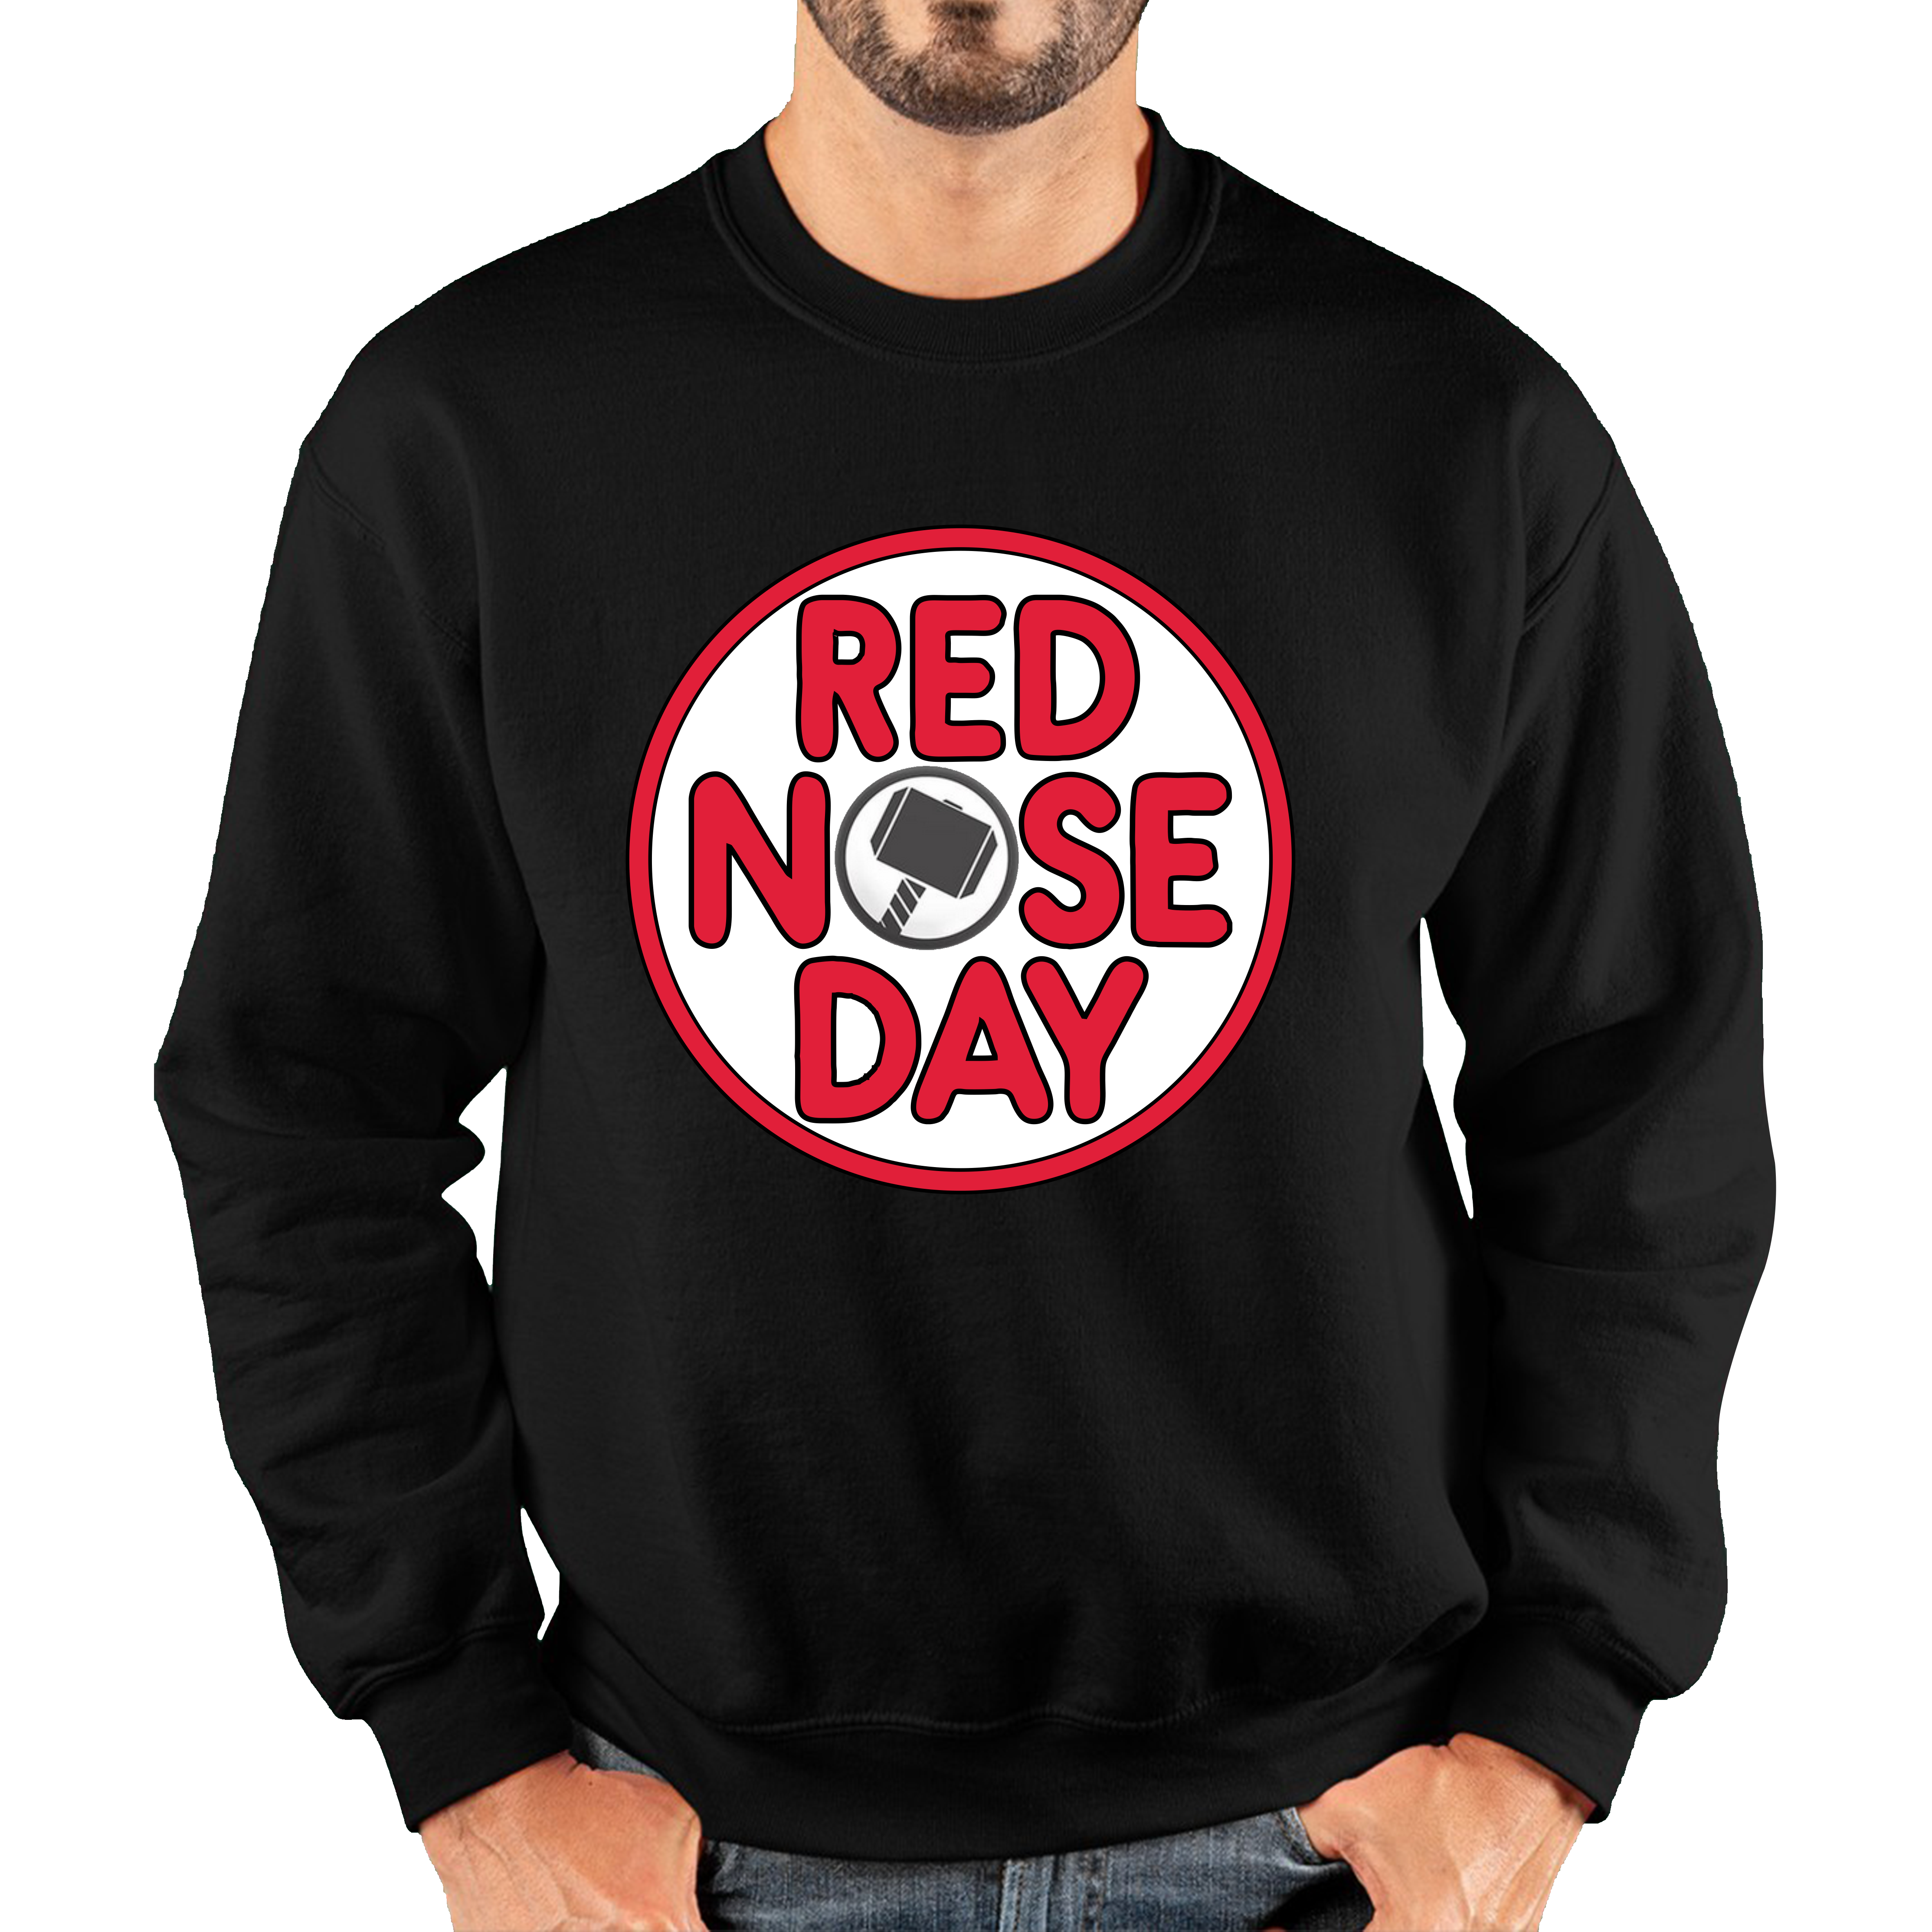 Marvel Avenger Thor Hammer Red Nose Day Adult Sweatshirt. 50% Goes To Charity